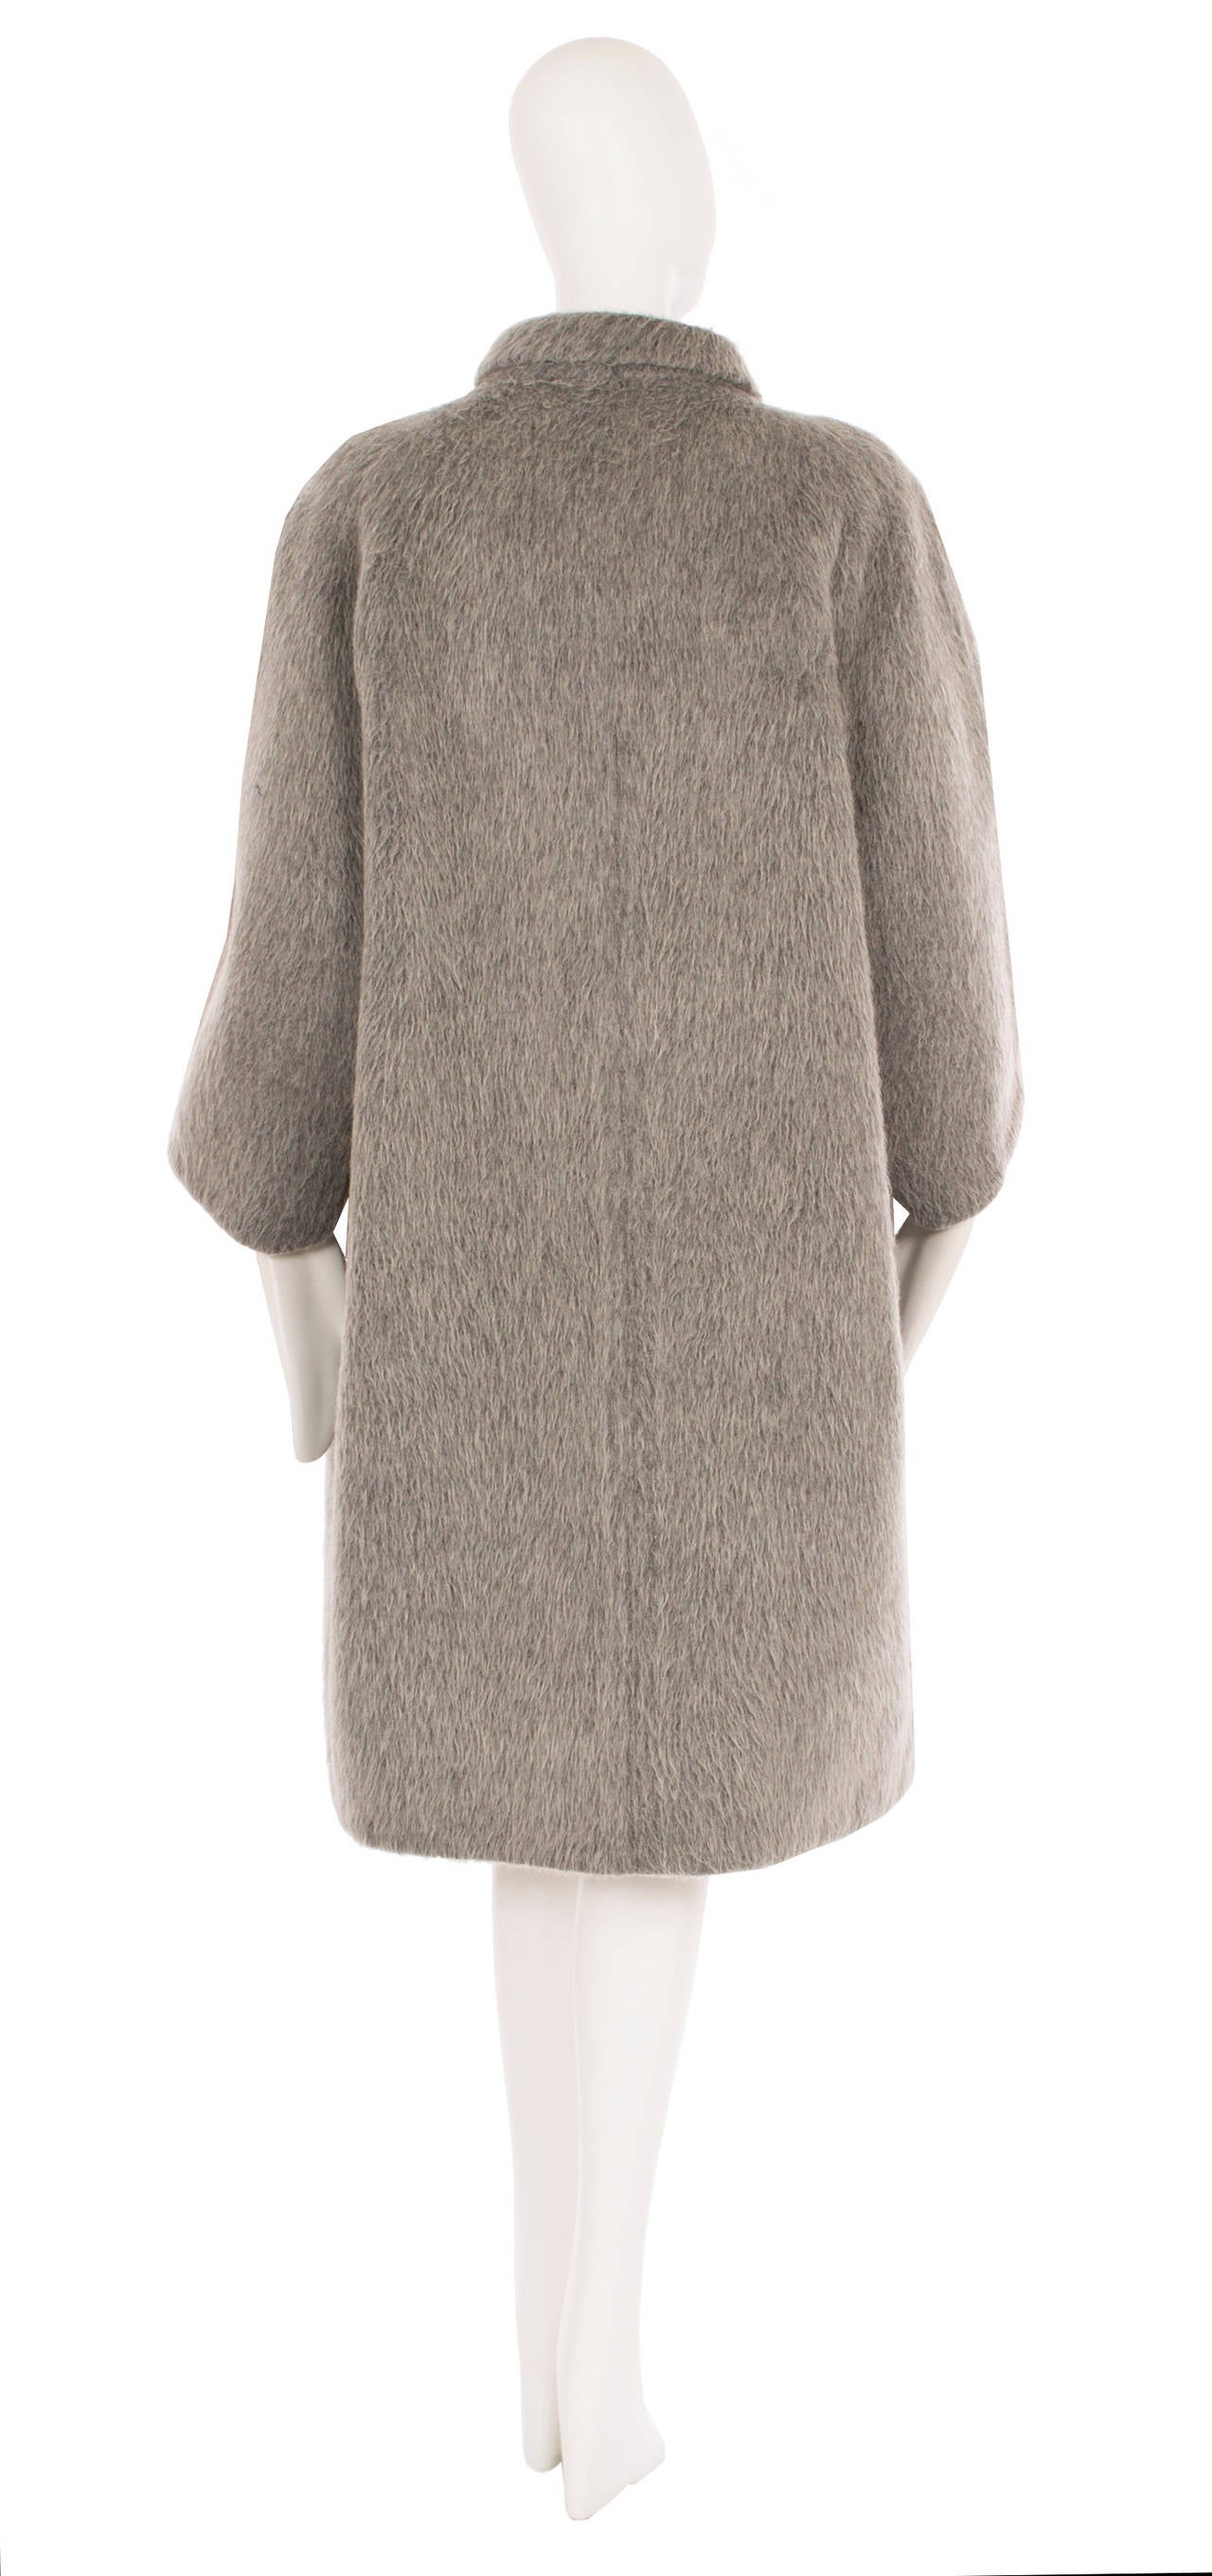 Balenciaga haute couture grey wool coat, Circa 1956 In Excellent Condition For Sale In London, GB